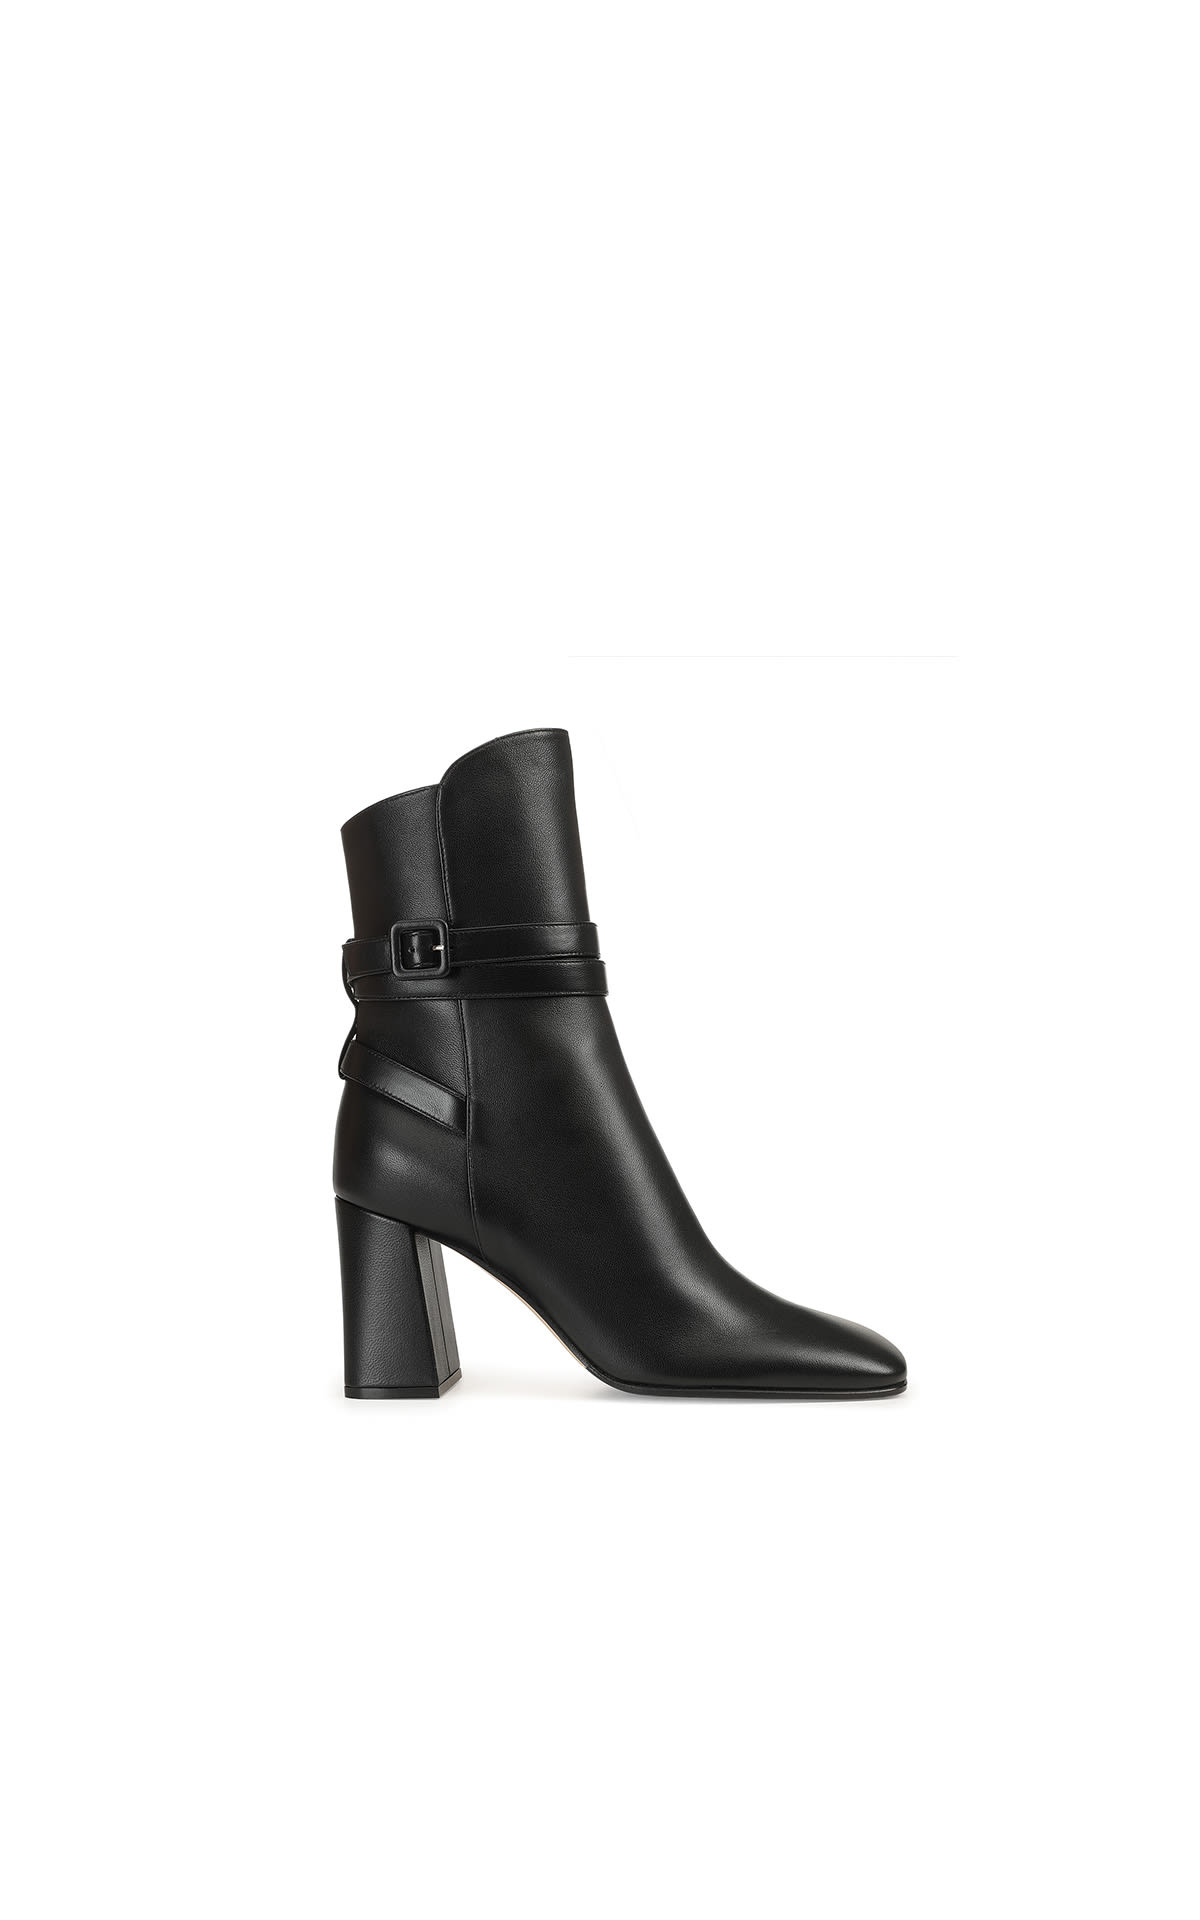 Sergio Rossi Black leather ankle boots with buckle